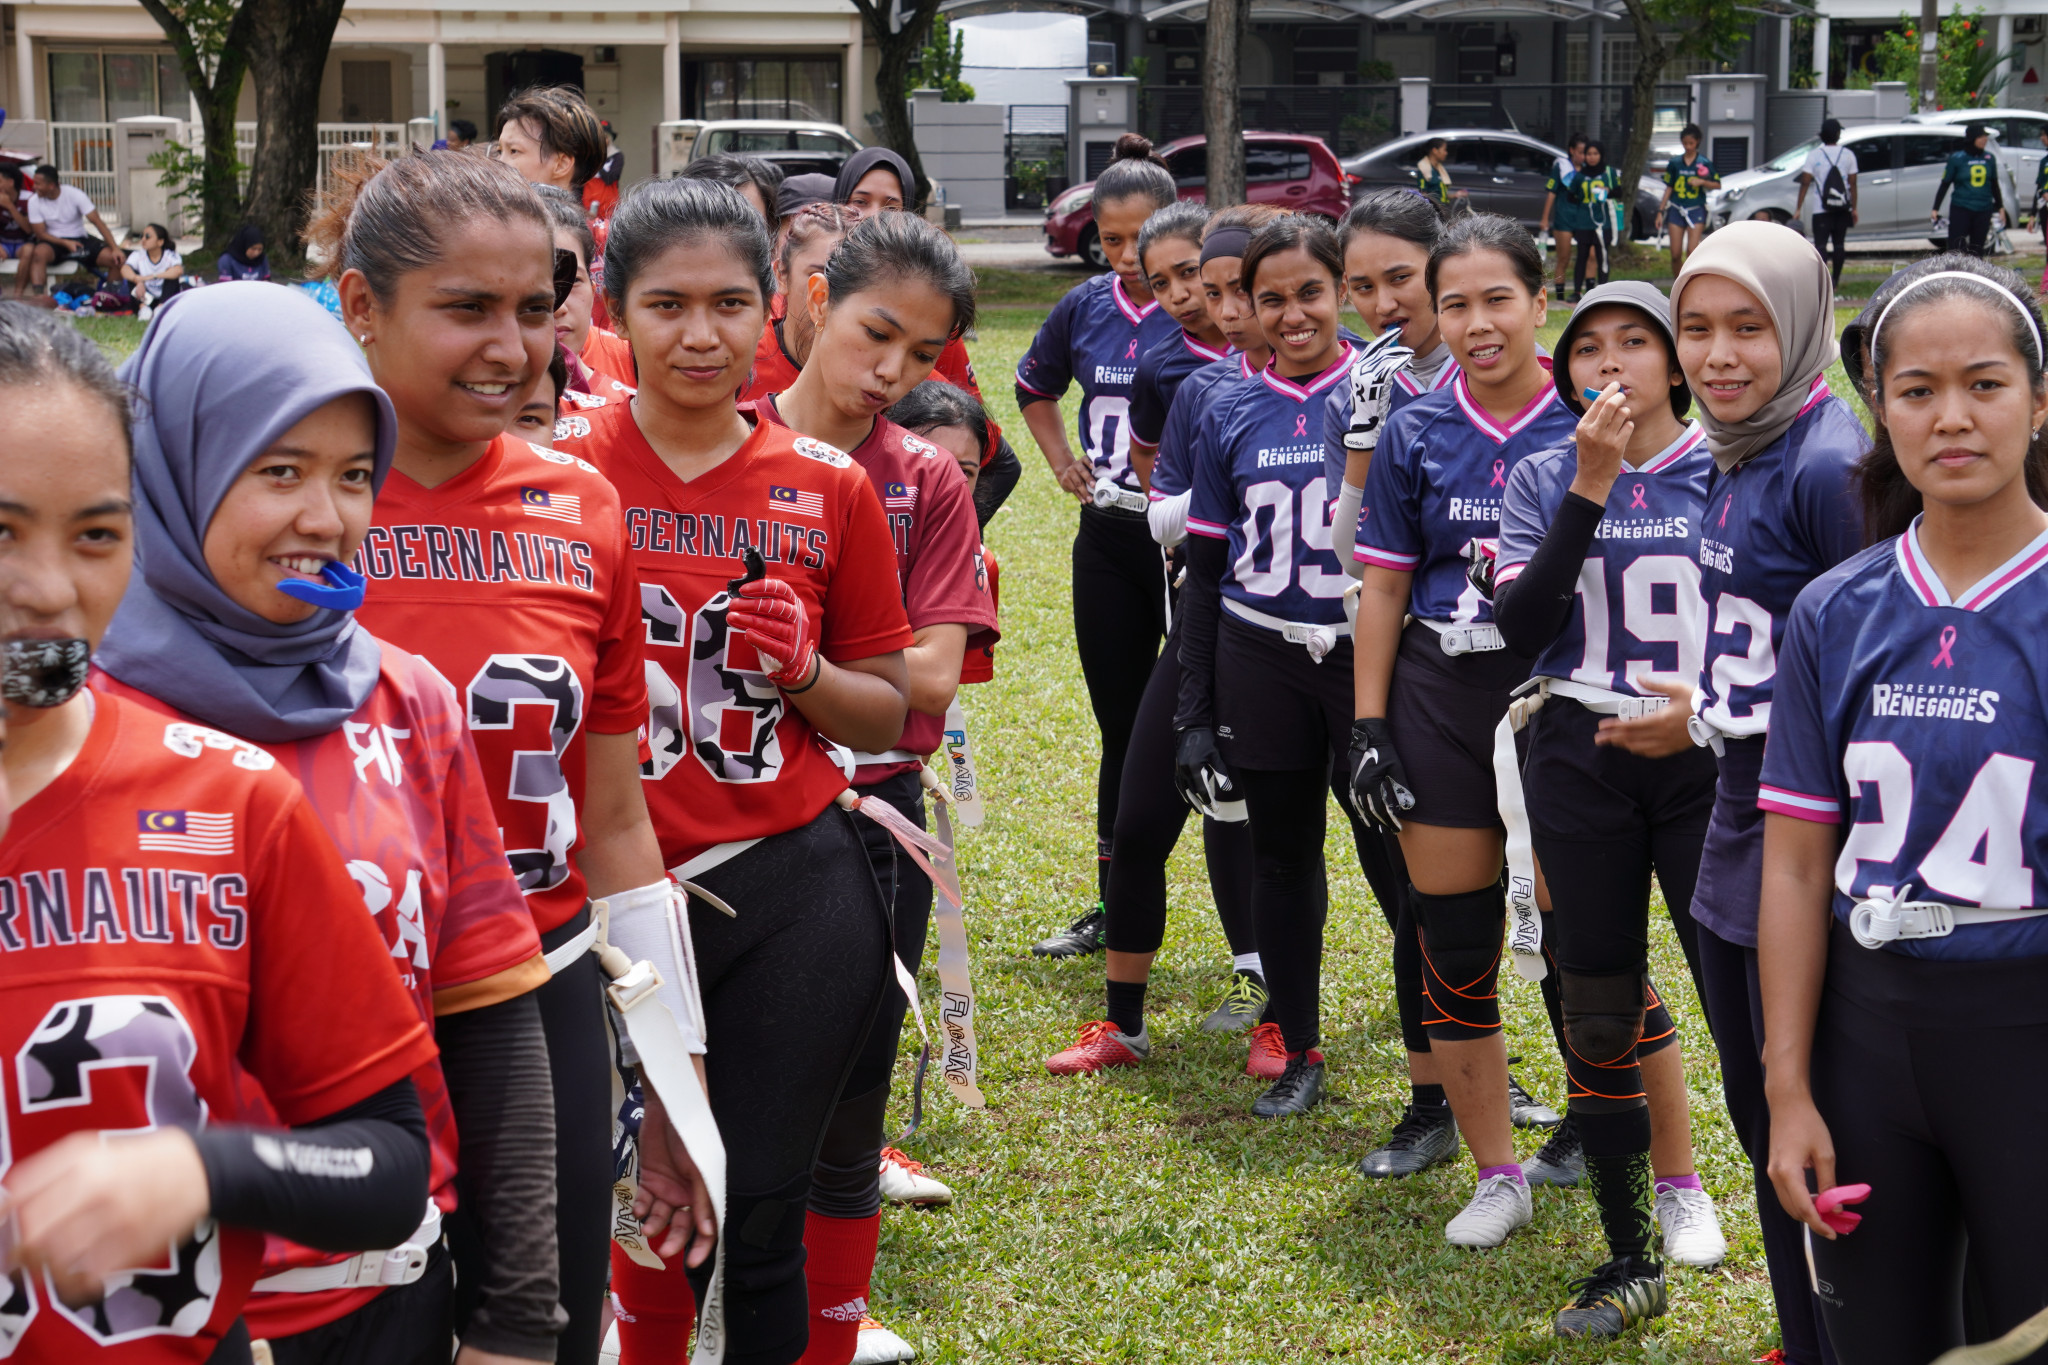 IFAF also stage the biennial Flag Football World Championships which feature men's and women's tournaments ©IFAF